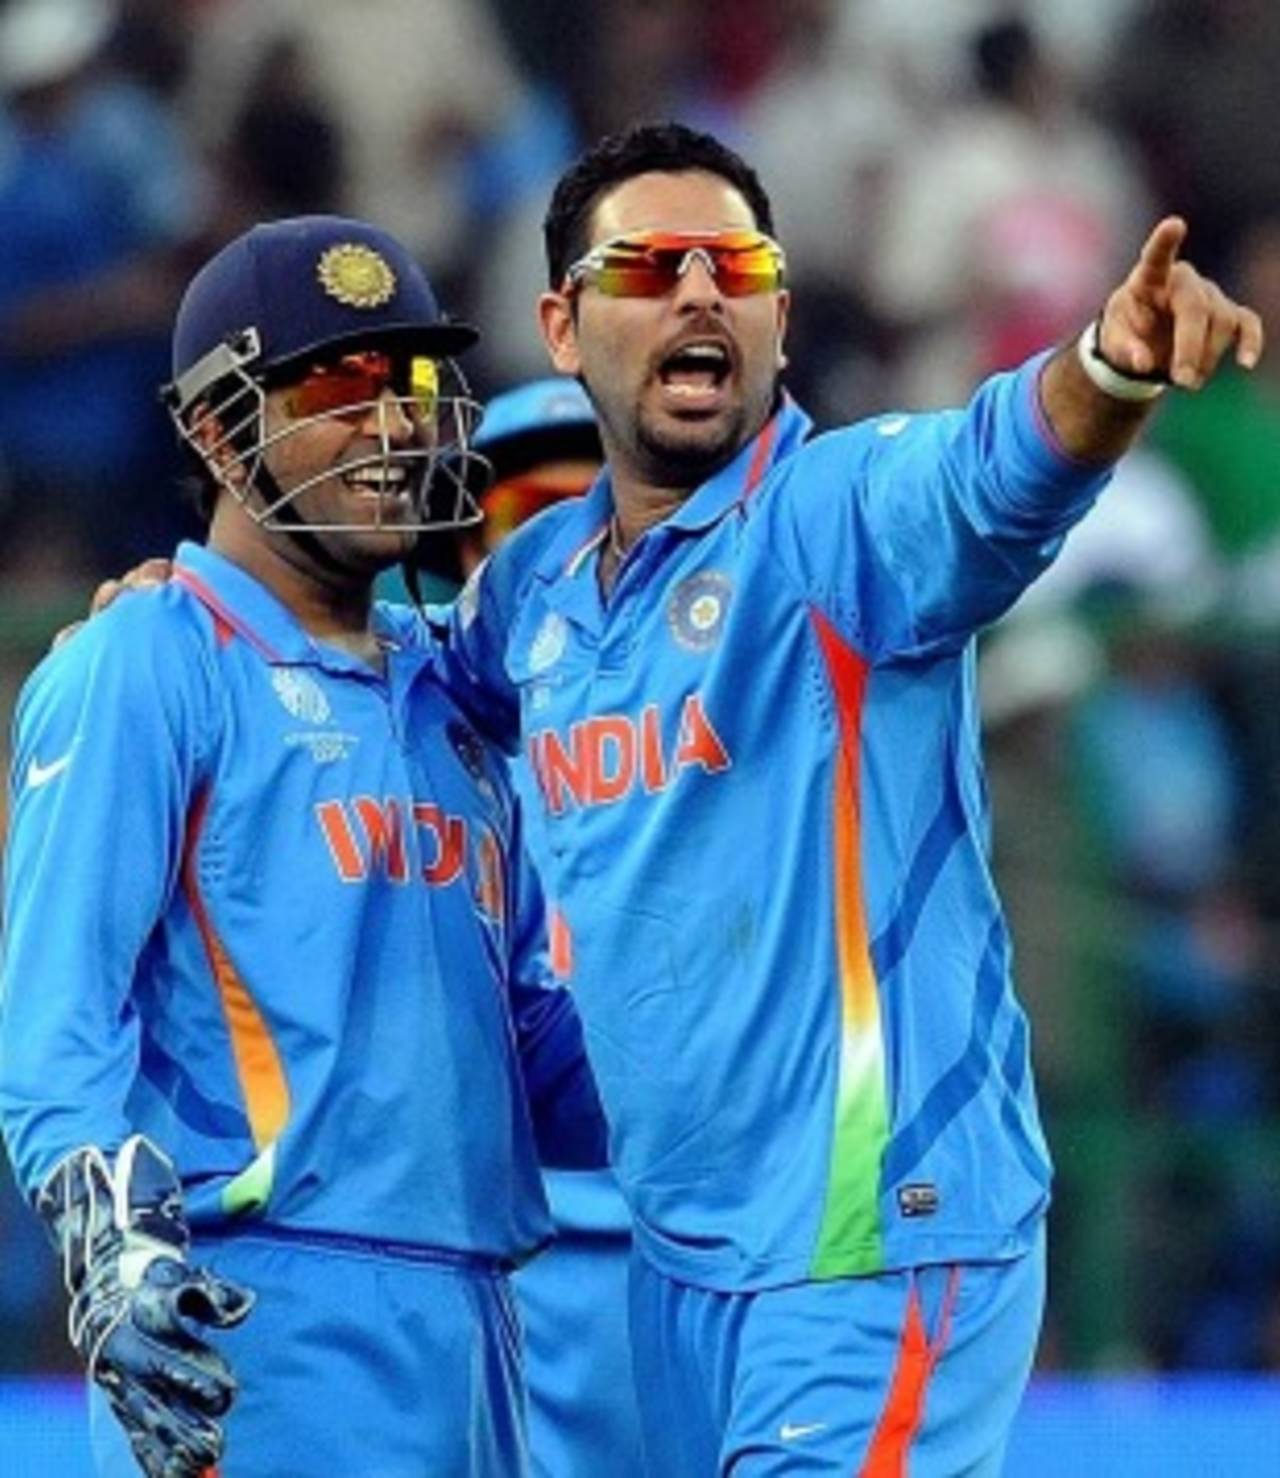 Yuvraj Singh celebrates his five-wicket haul with MS Dhoni, India v Ireland, Group B, World Cup 2011, Bangalore, March 6, 2011